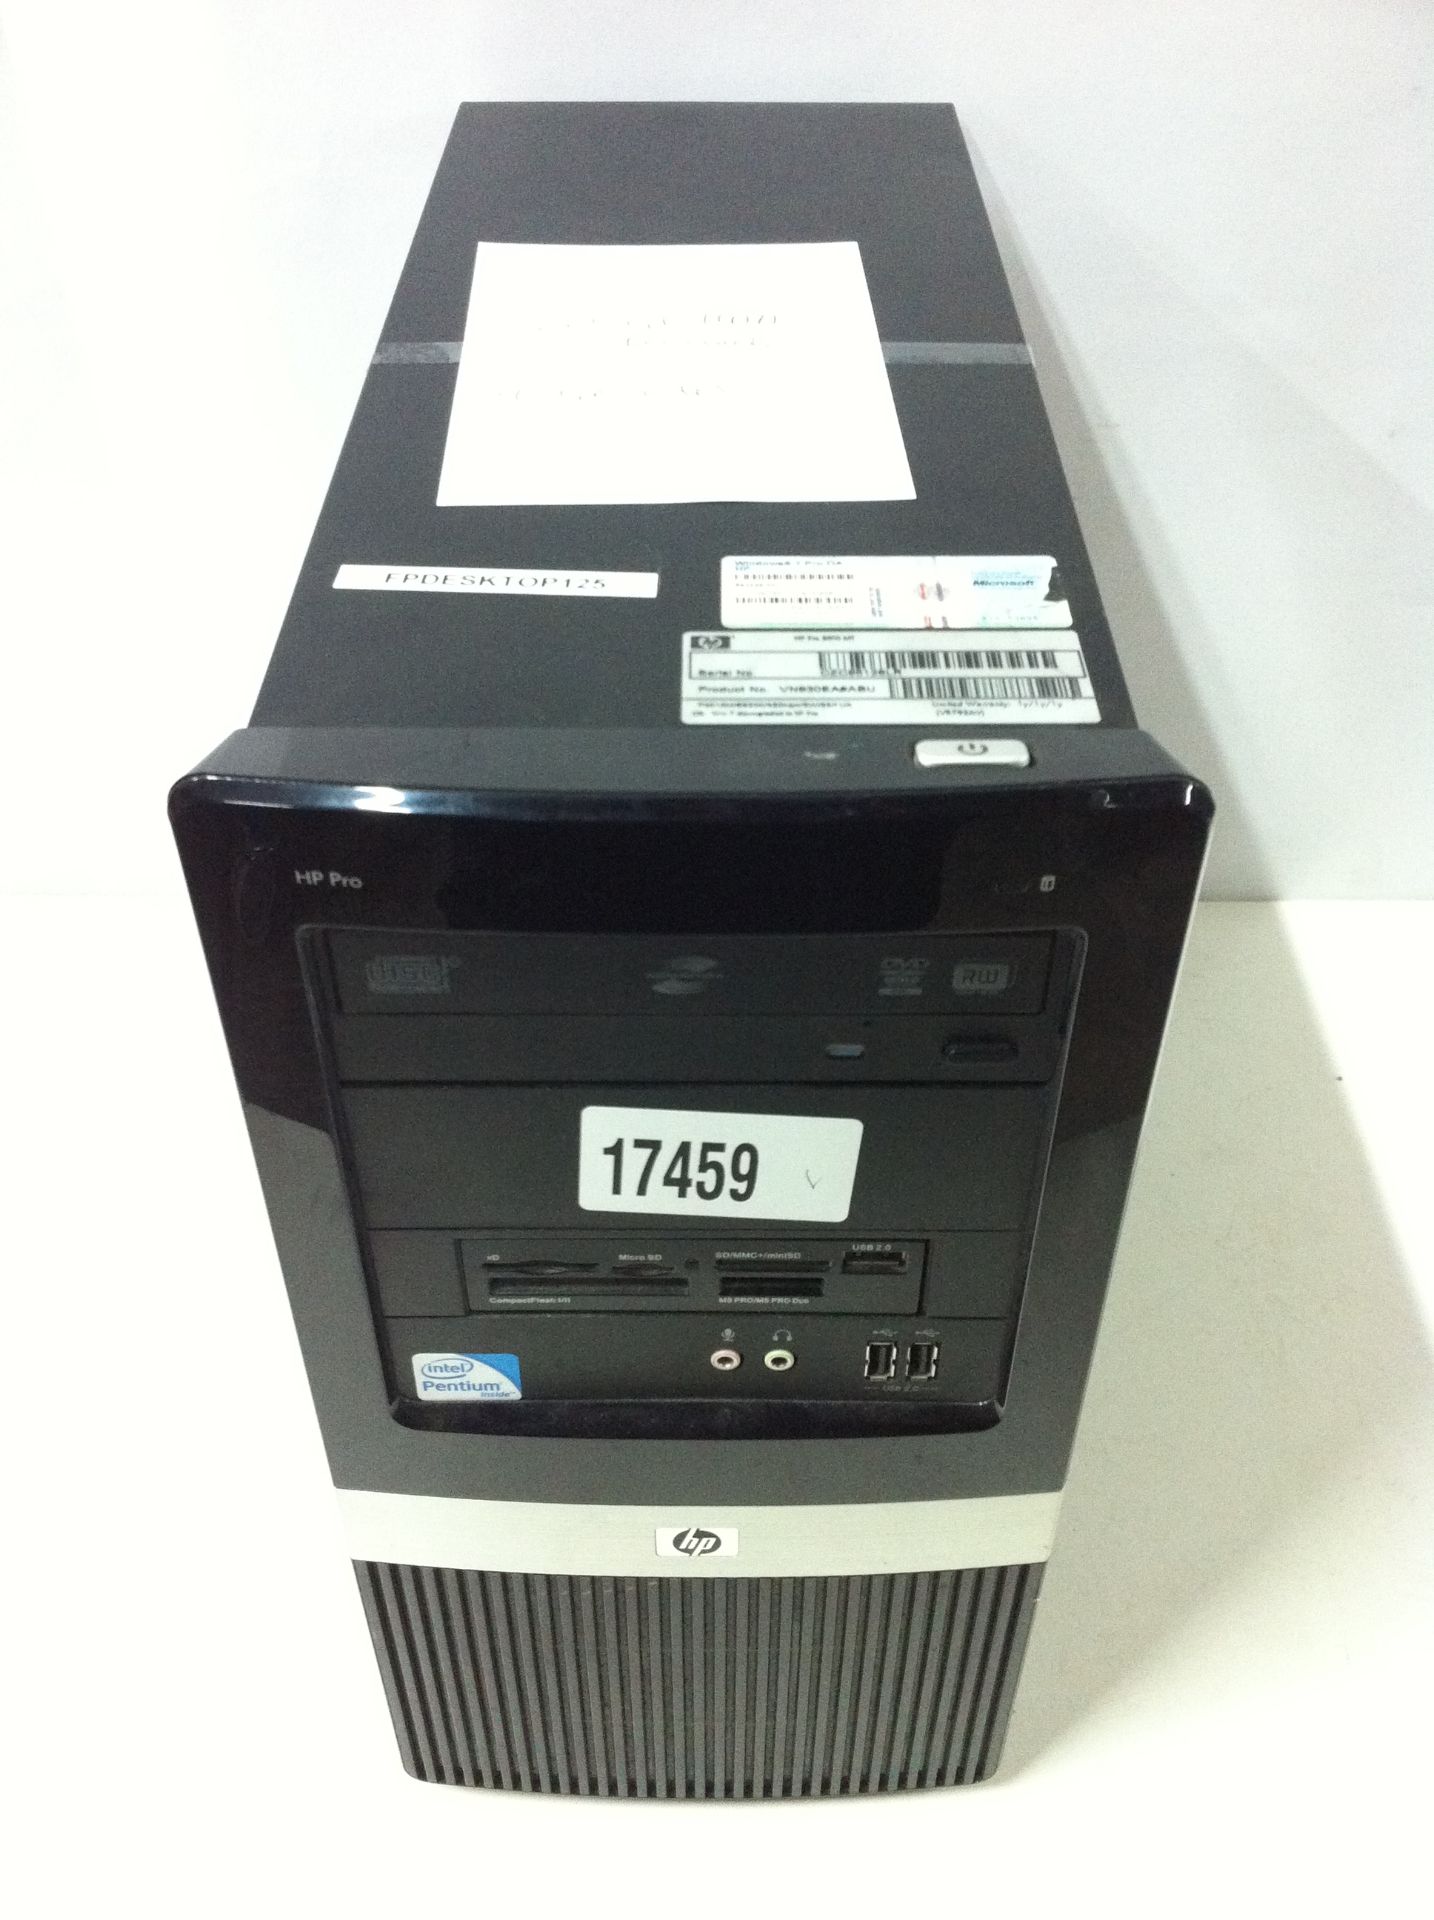 4 x HP Pro Desktop PC's, see description for specifications - Image 3 of 5